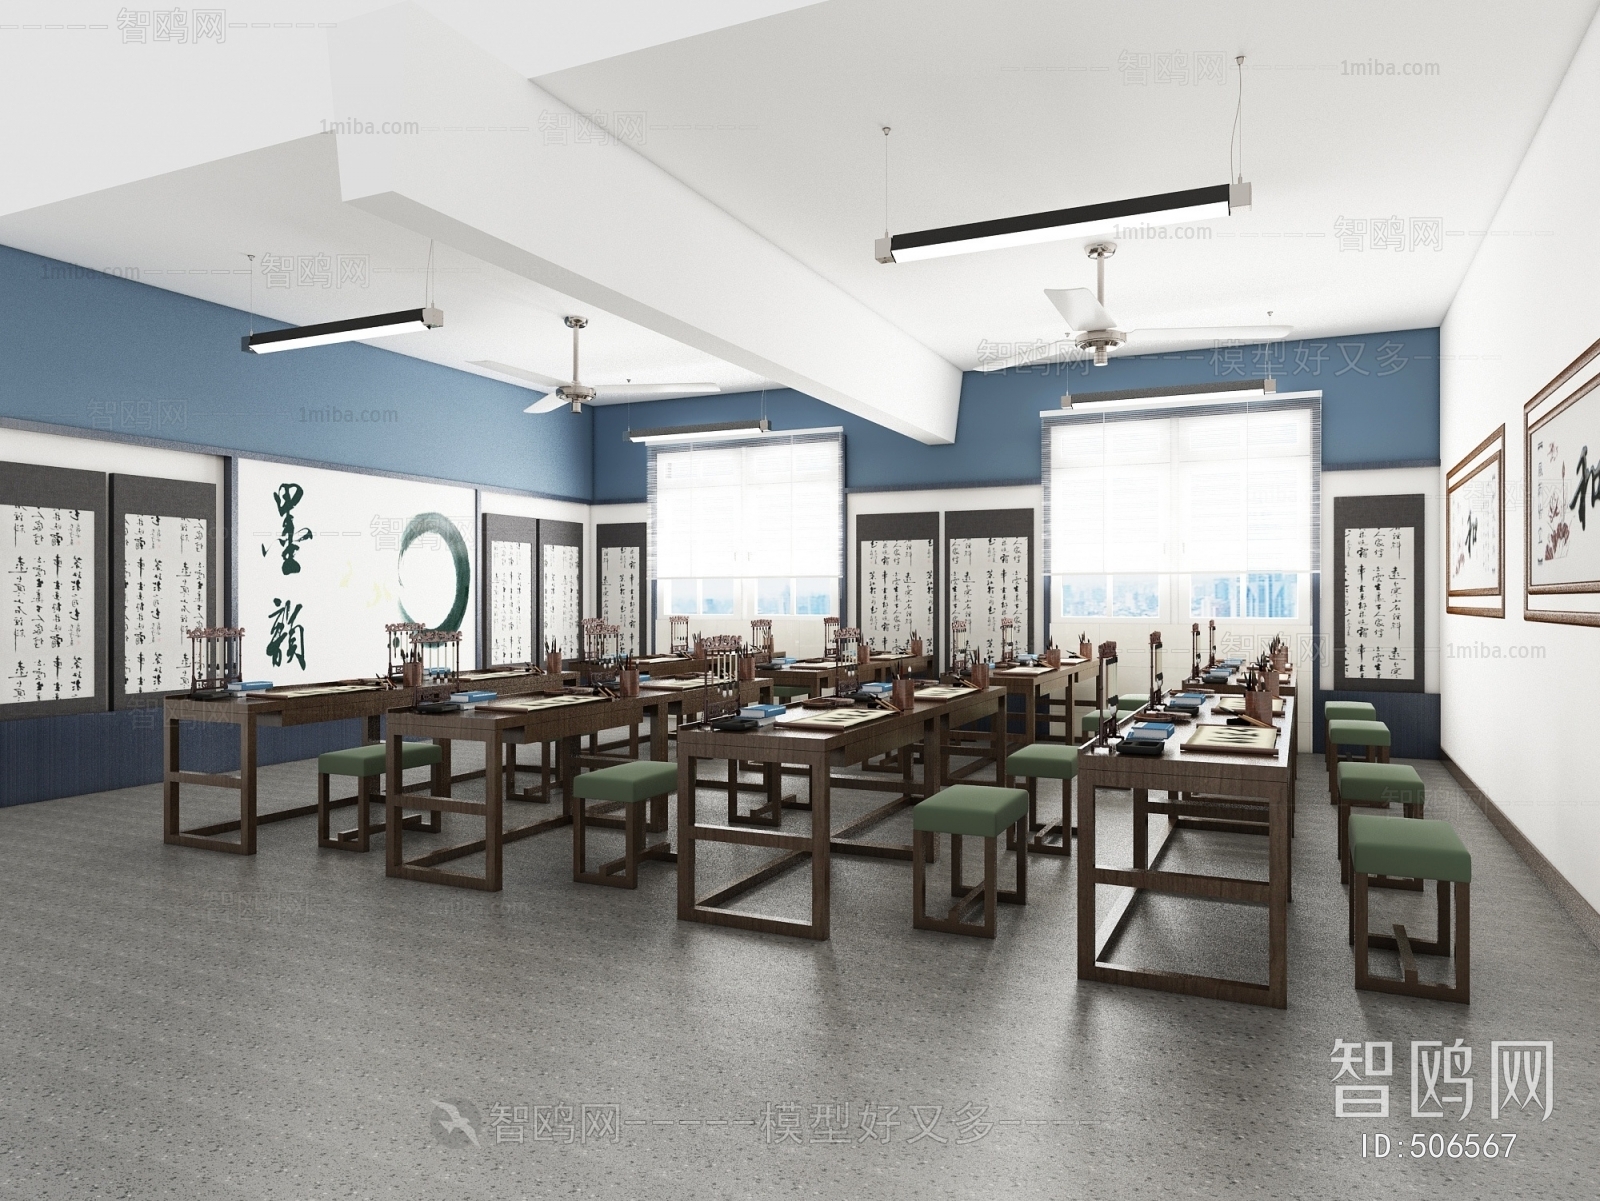 New Chinese Style Training Institution